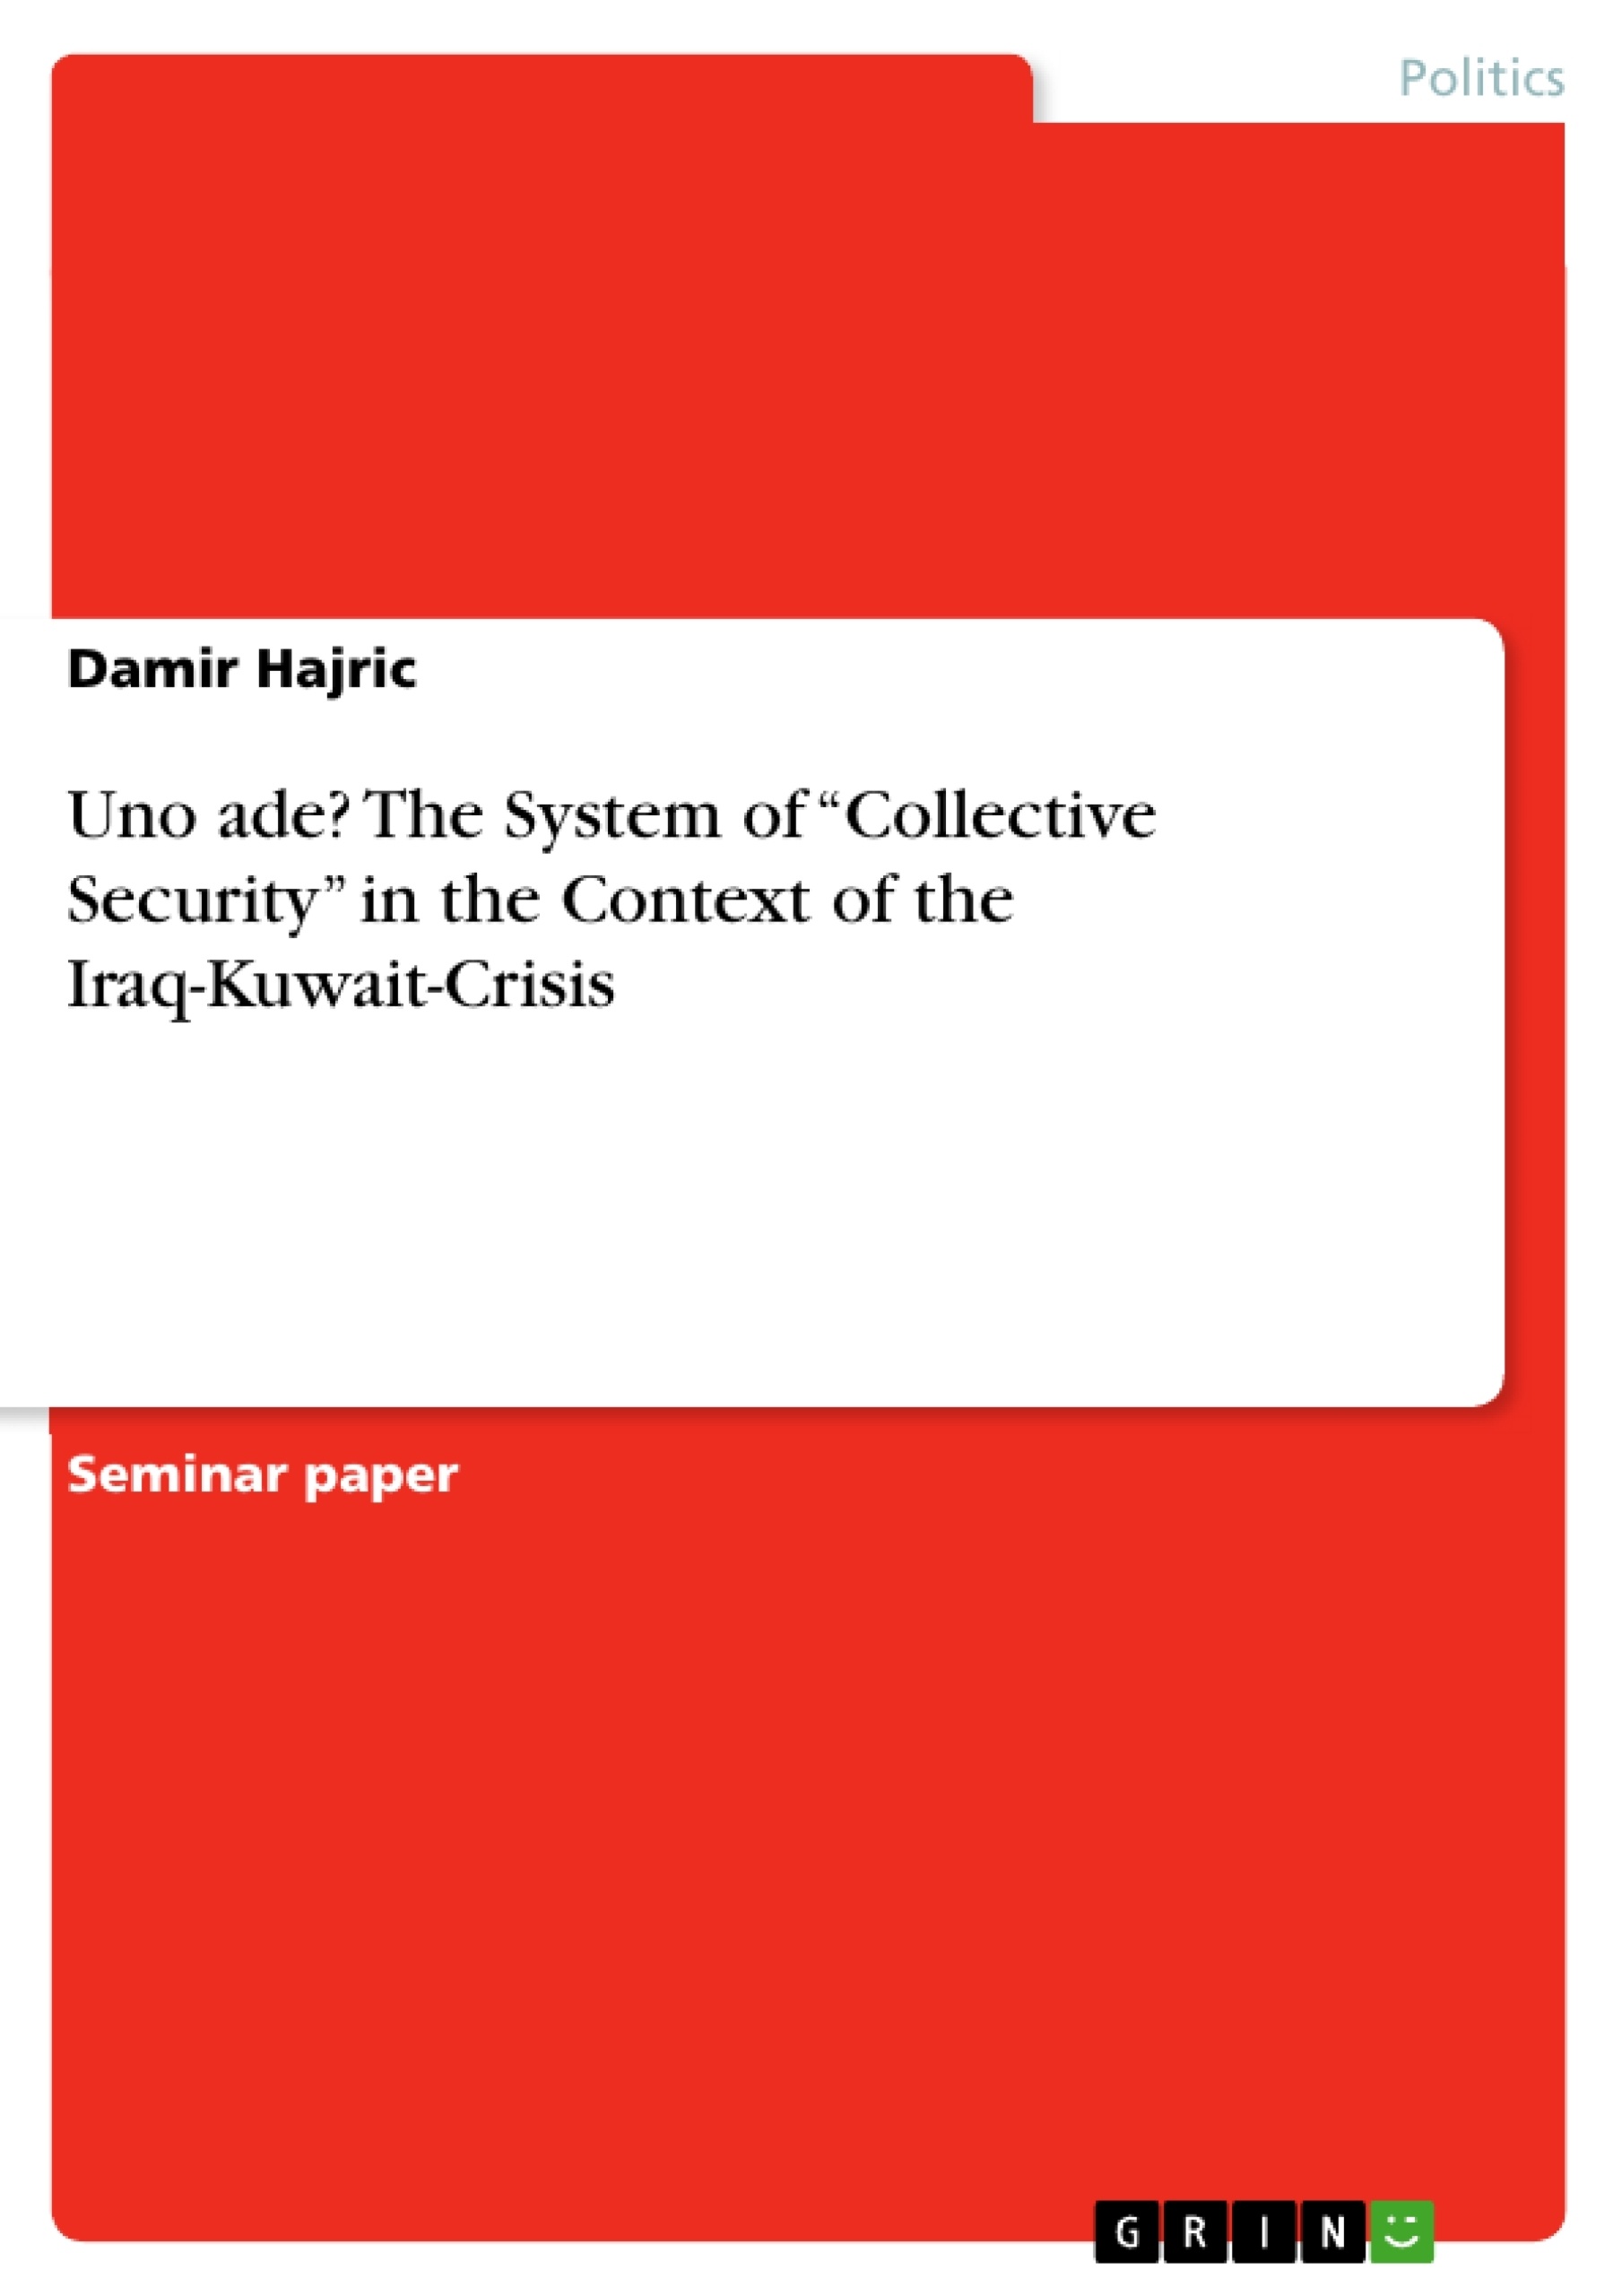 Título: Uno ade? The System of “Collective Security” in the Context of the Iraq-Kuwait-Crisis